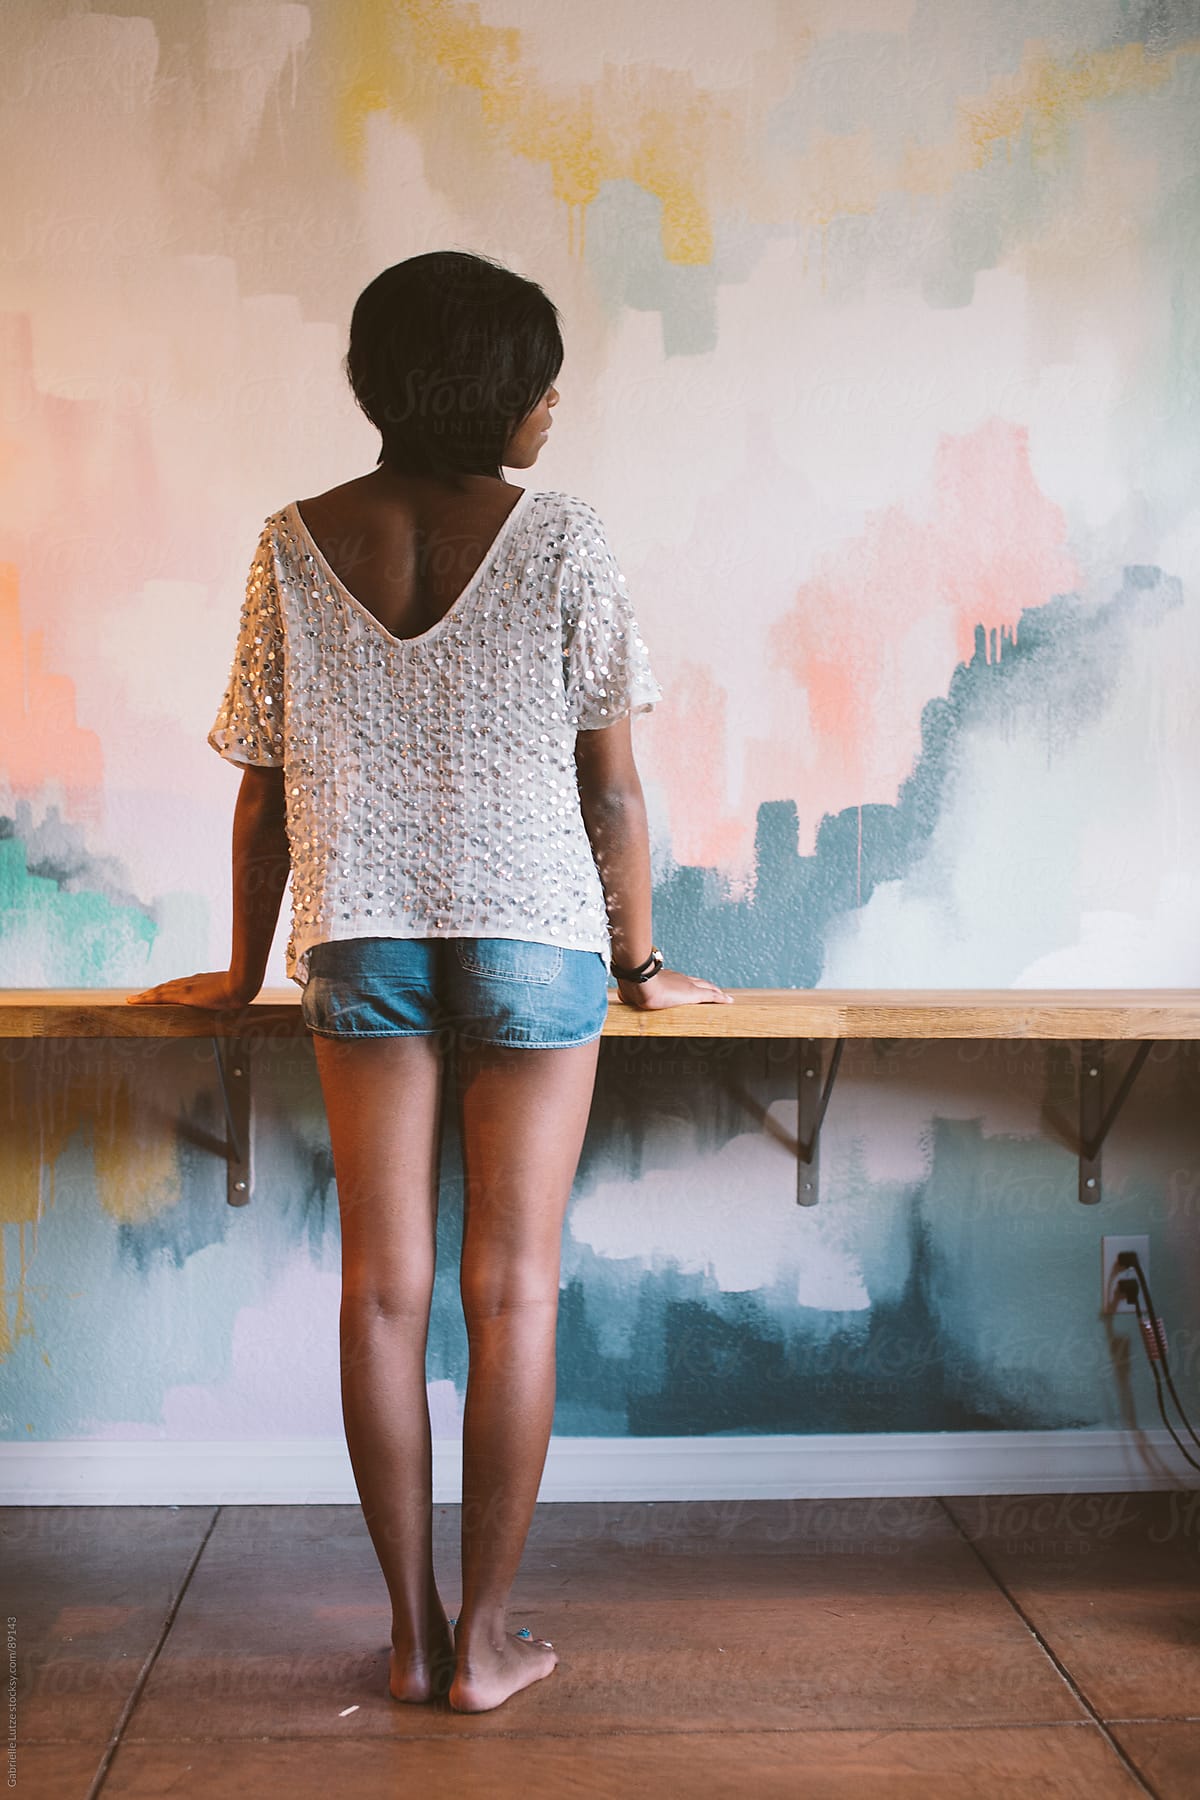 Black girl standing at desk in front of a painted wall